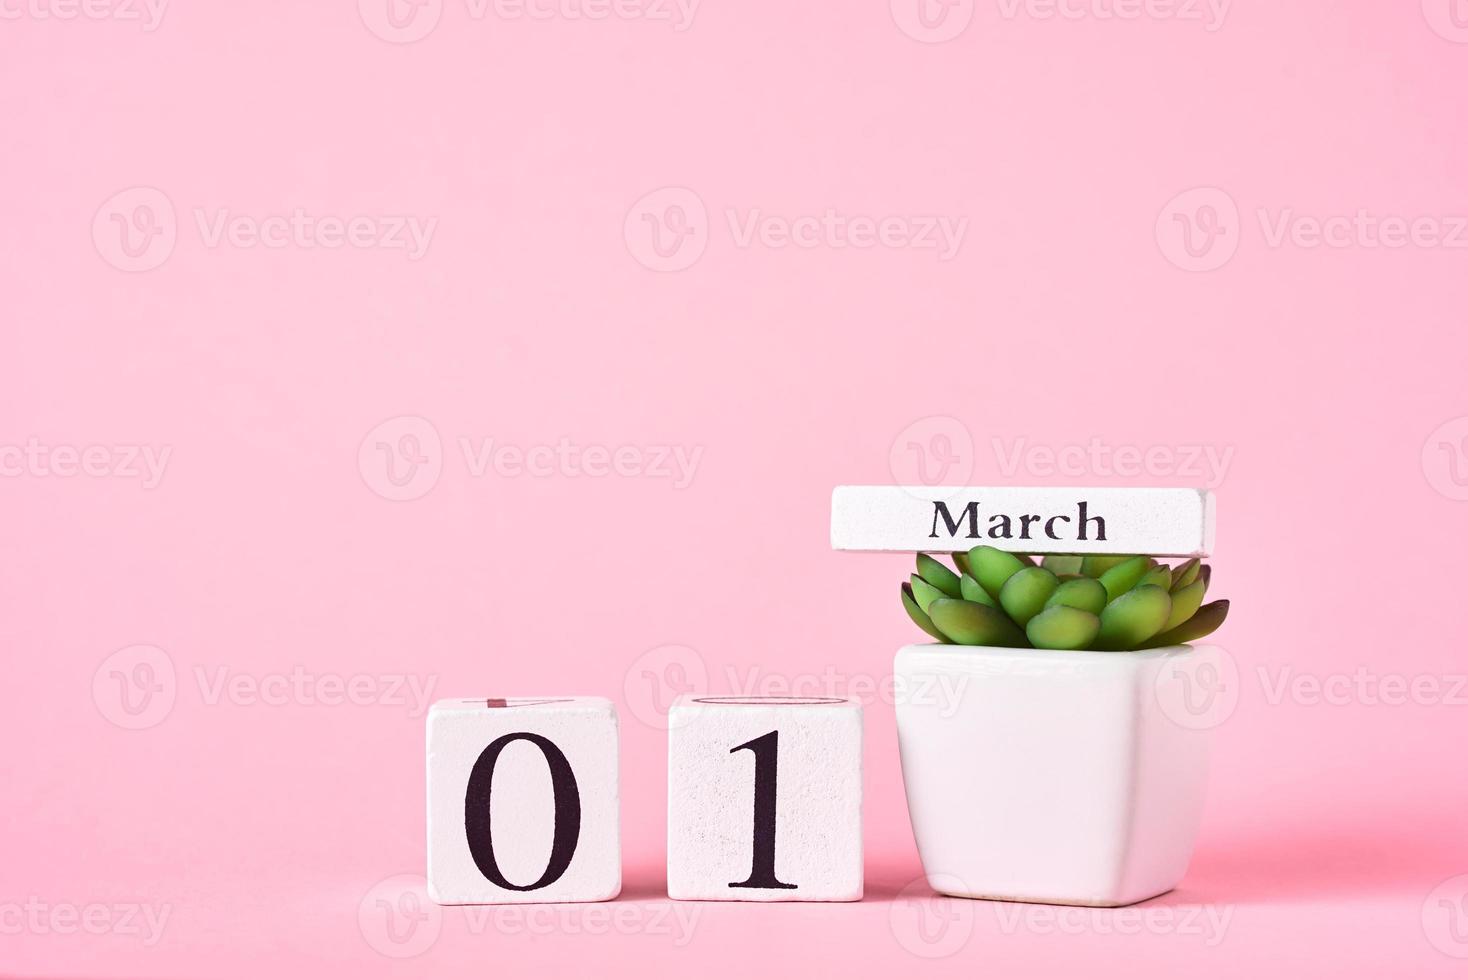 Wooden block calendar with date 1st march and plant on the pink background. Spring concept photo